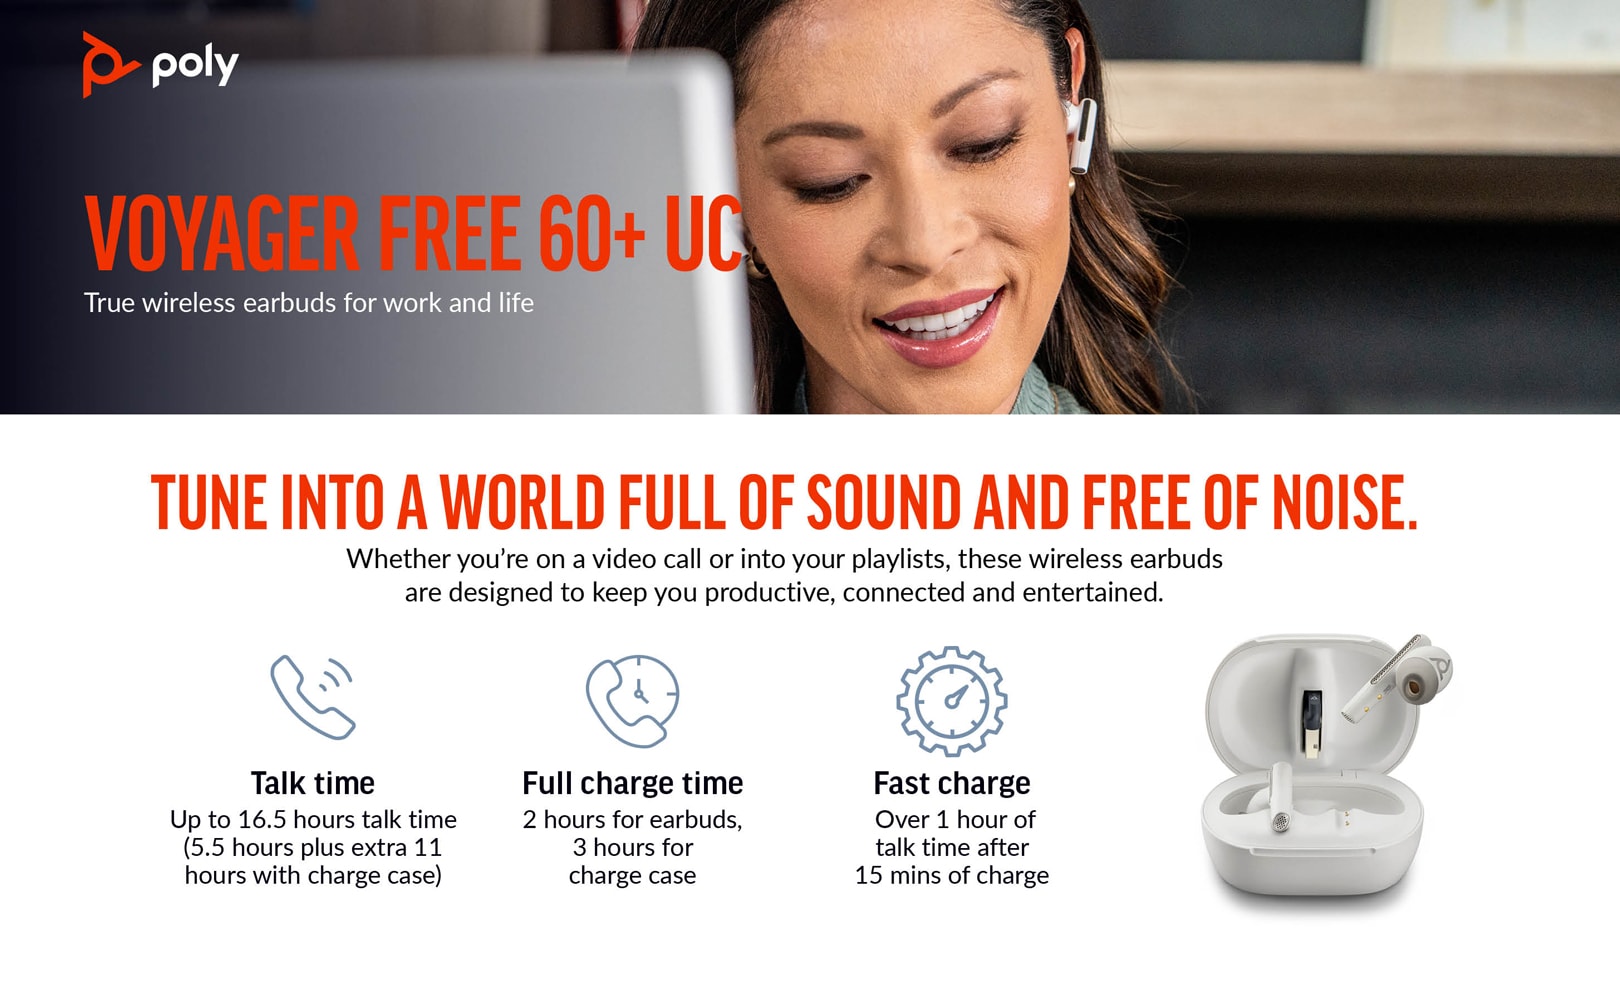 White USB Sand Poly Earbuds, Free BT700 UC Charge Touchscreen A Case adapter, Voyager 60+